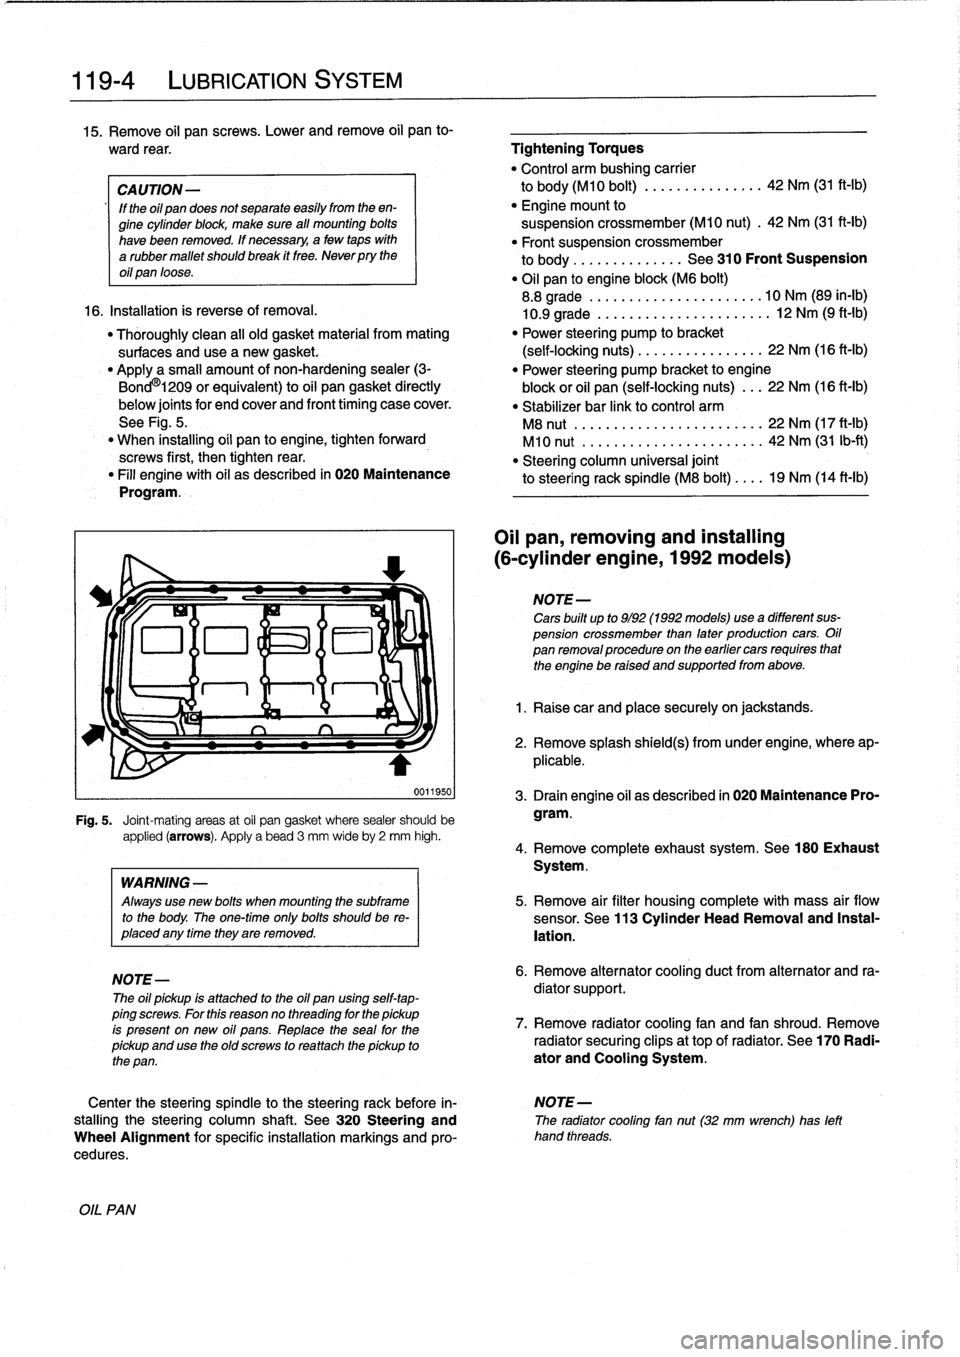 BMW 323i 1997 E36 Workshop Manual 
119-
4

	

LUBRICATION
SYSTEM

15
.
Remove
oil
pan
screws
.
Lower
andremove
oil
pan
to-

ward
rear
.

	

Tightening
Torques

"
Control
arm
bushing
carrier

CAUTION-

	

to
body(M10
bolt)
............